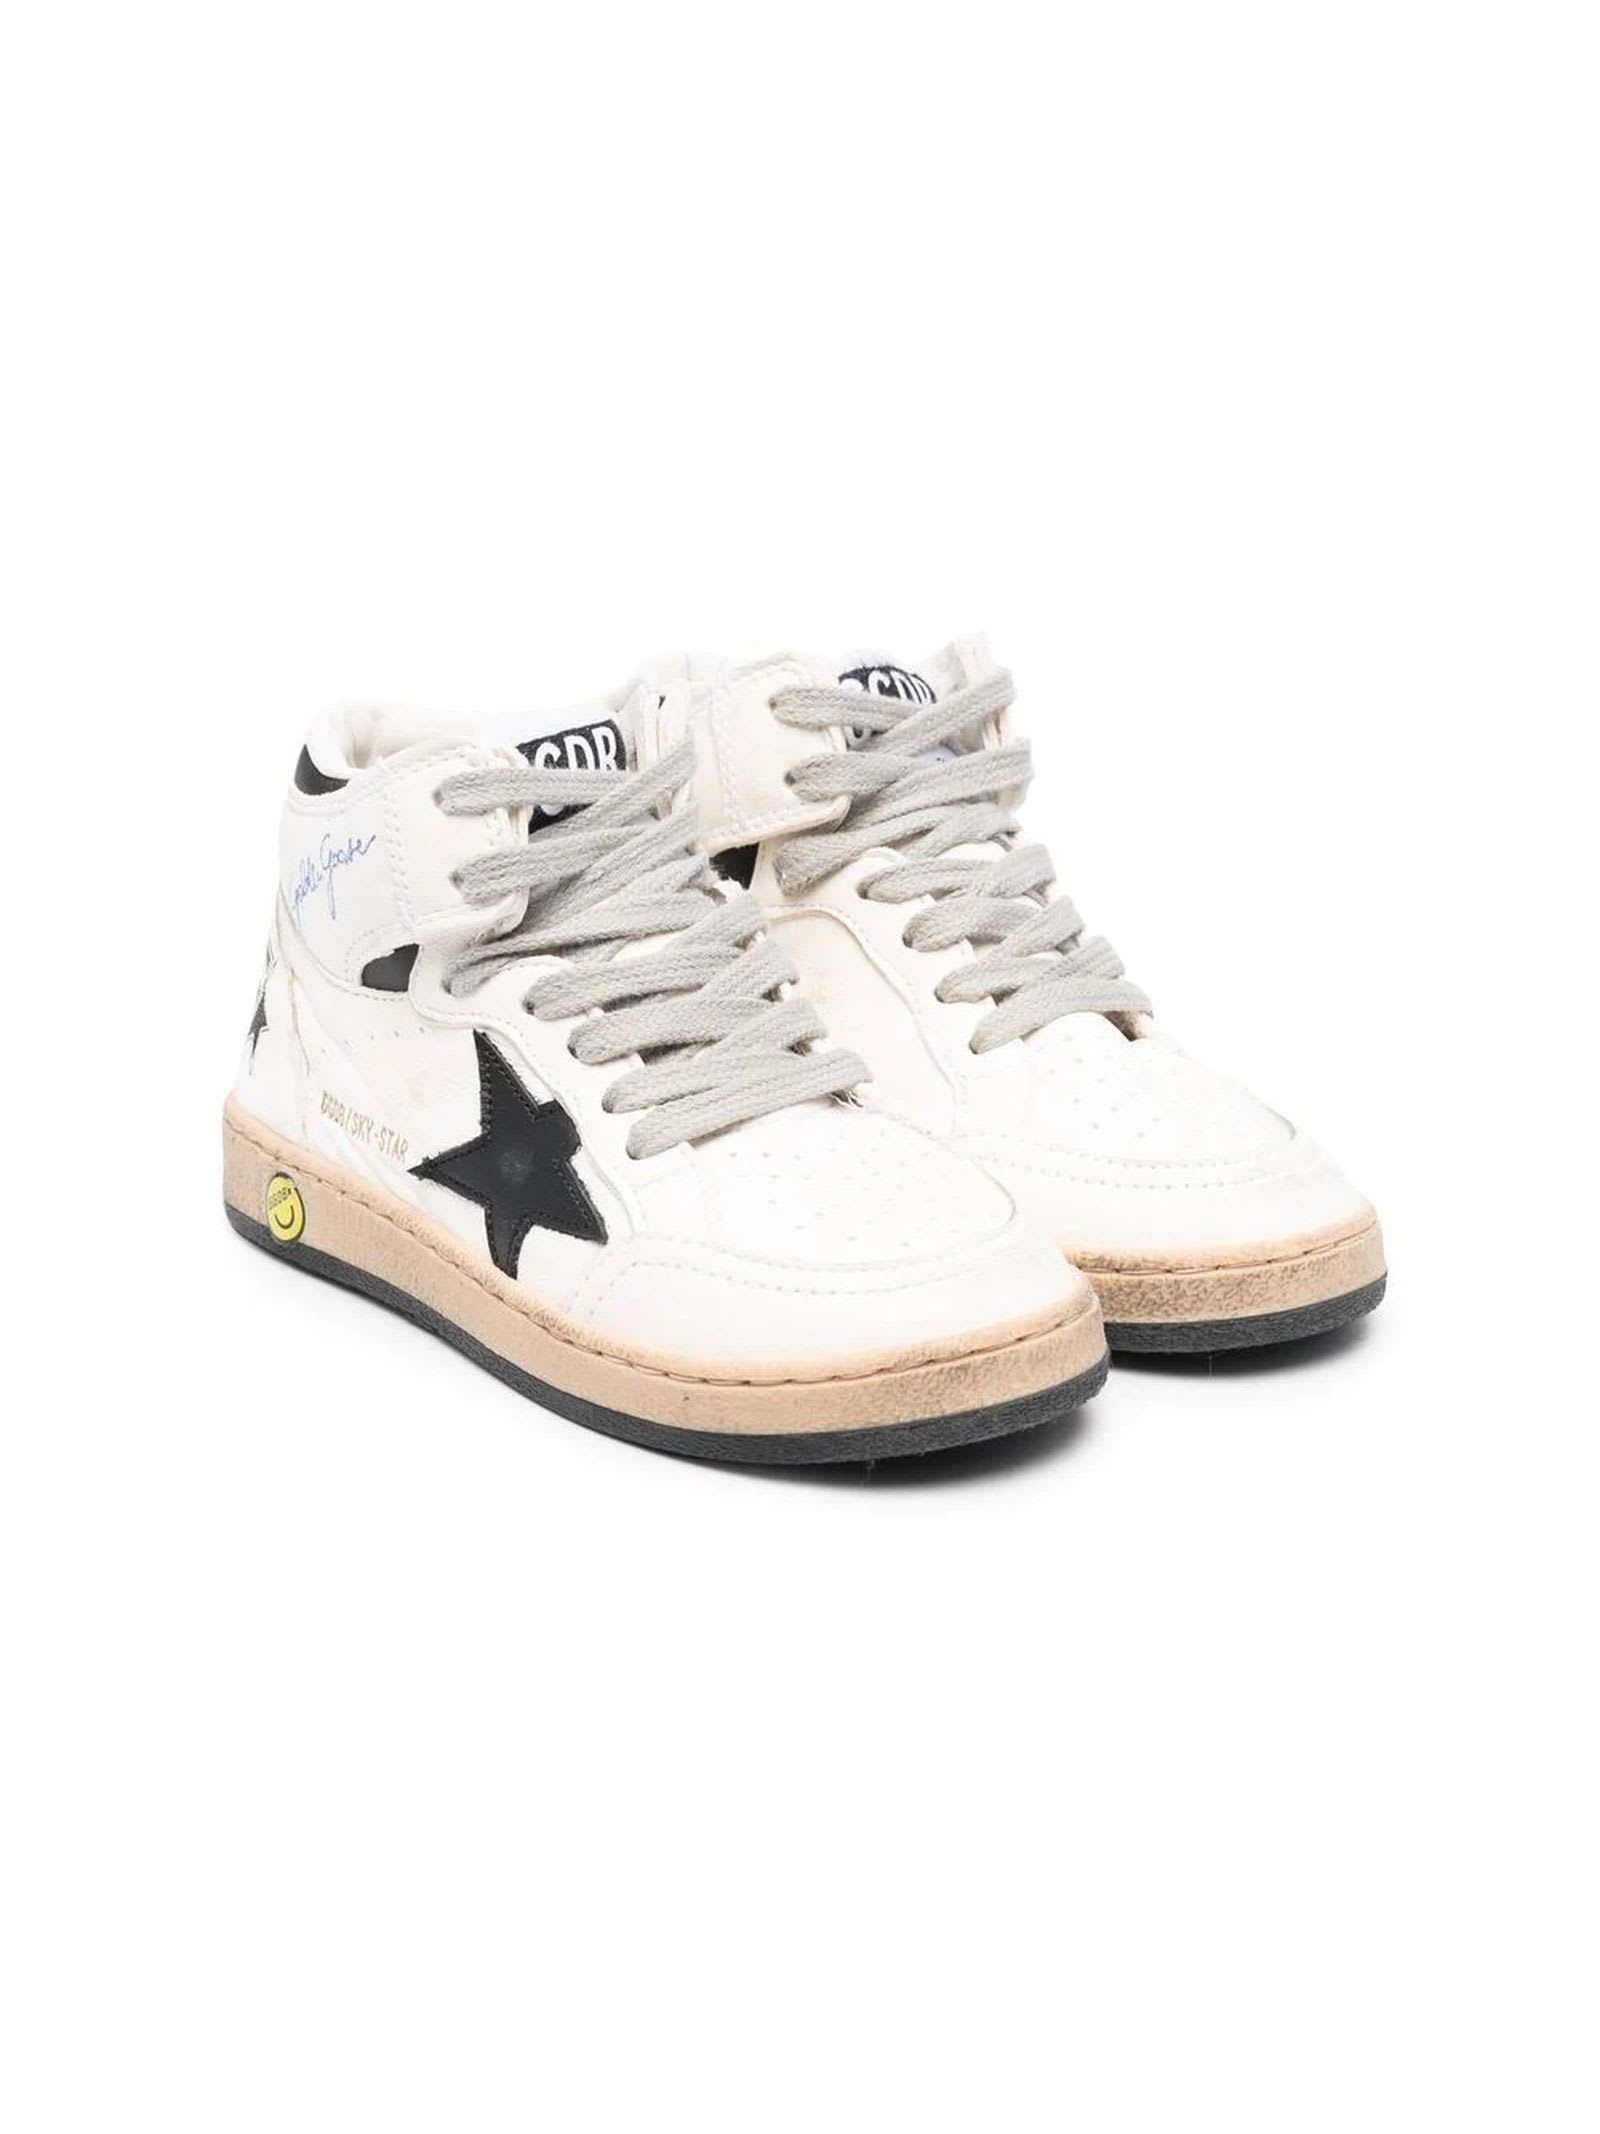 Golden Goose White Calf Leather Sneakers